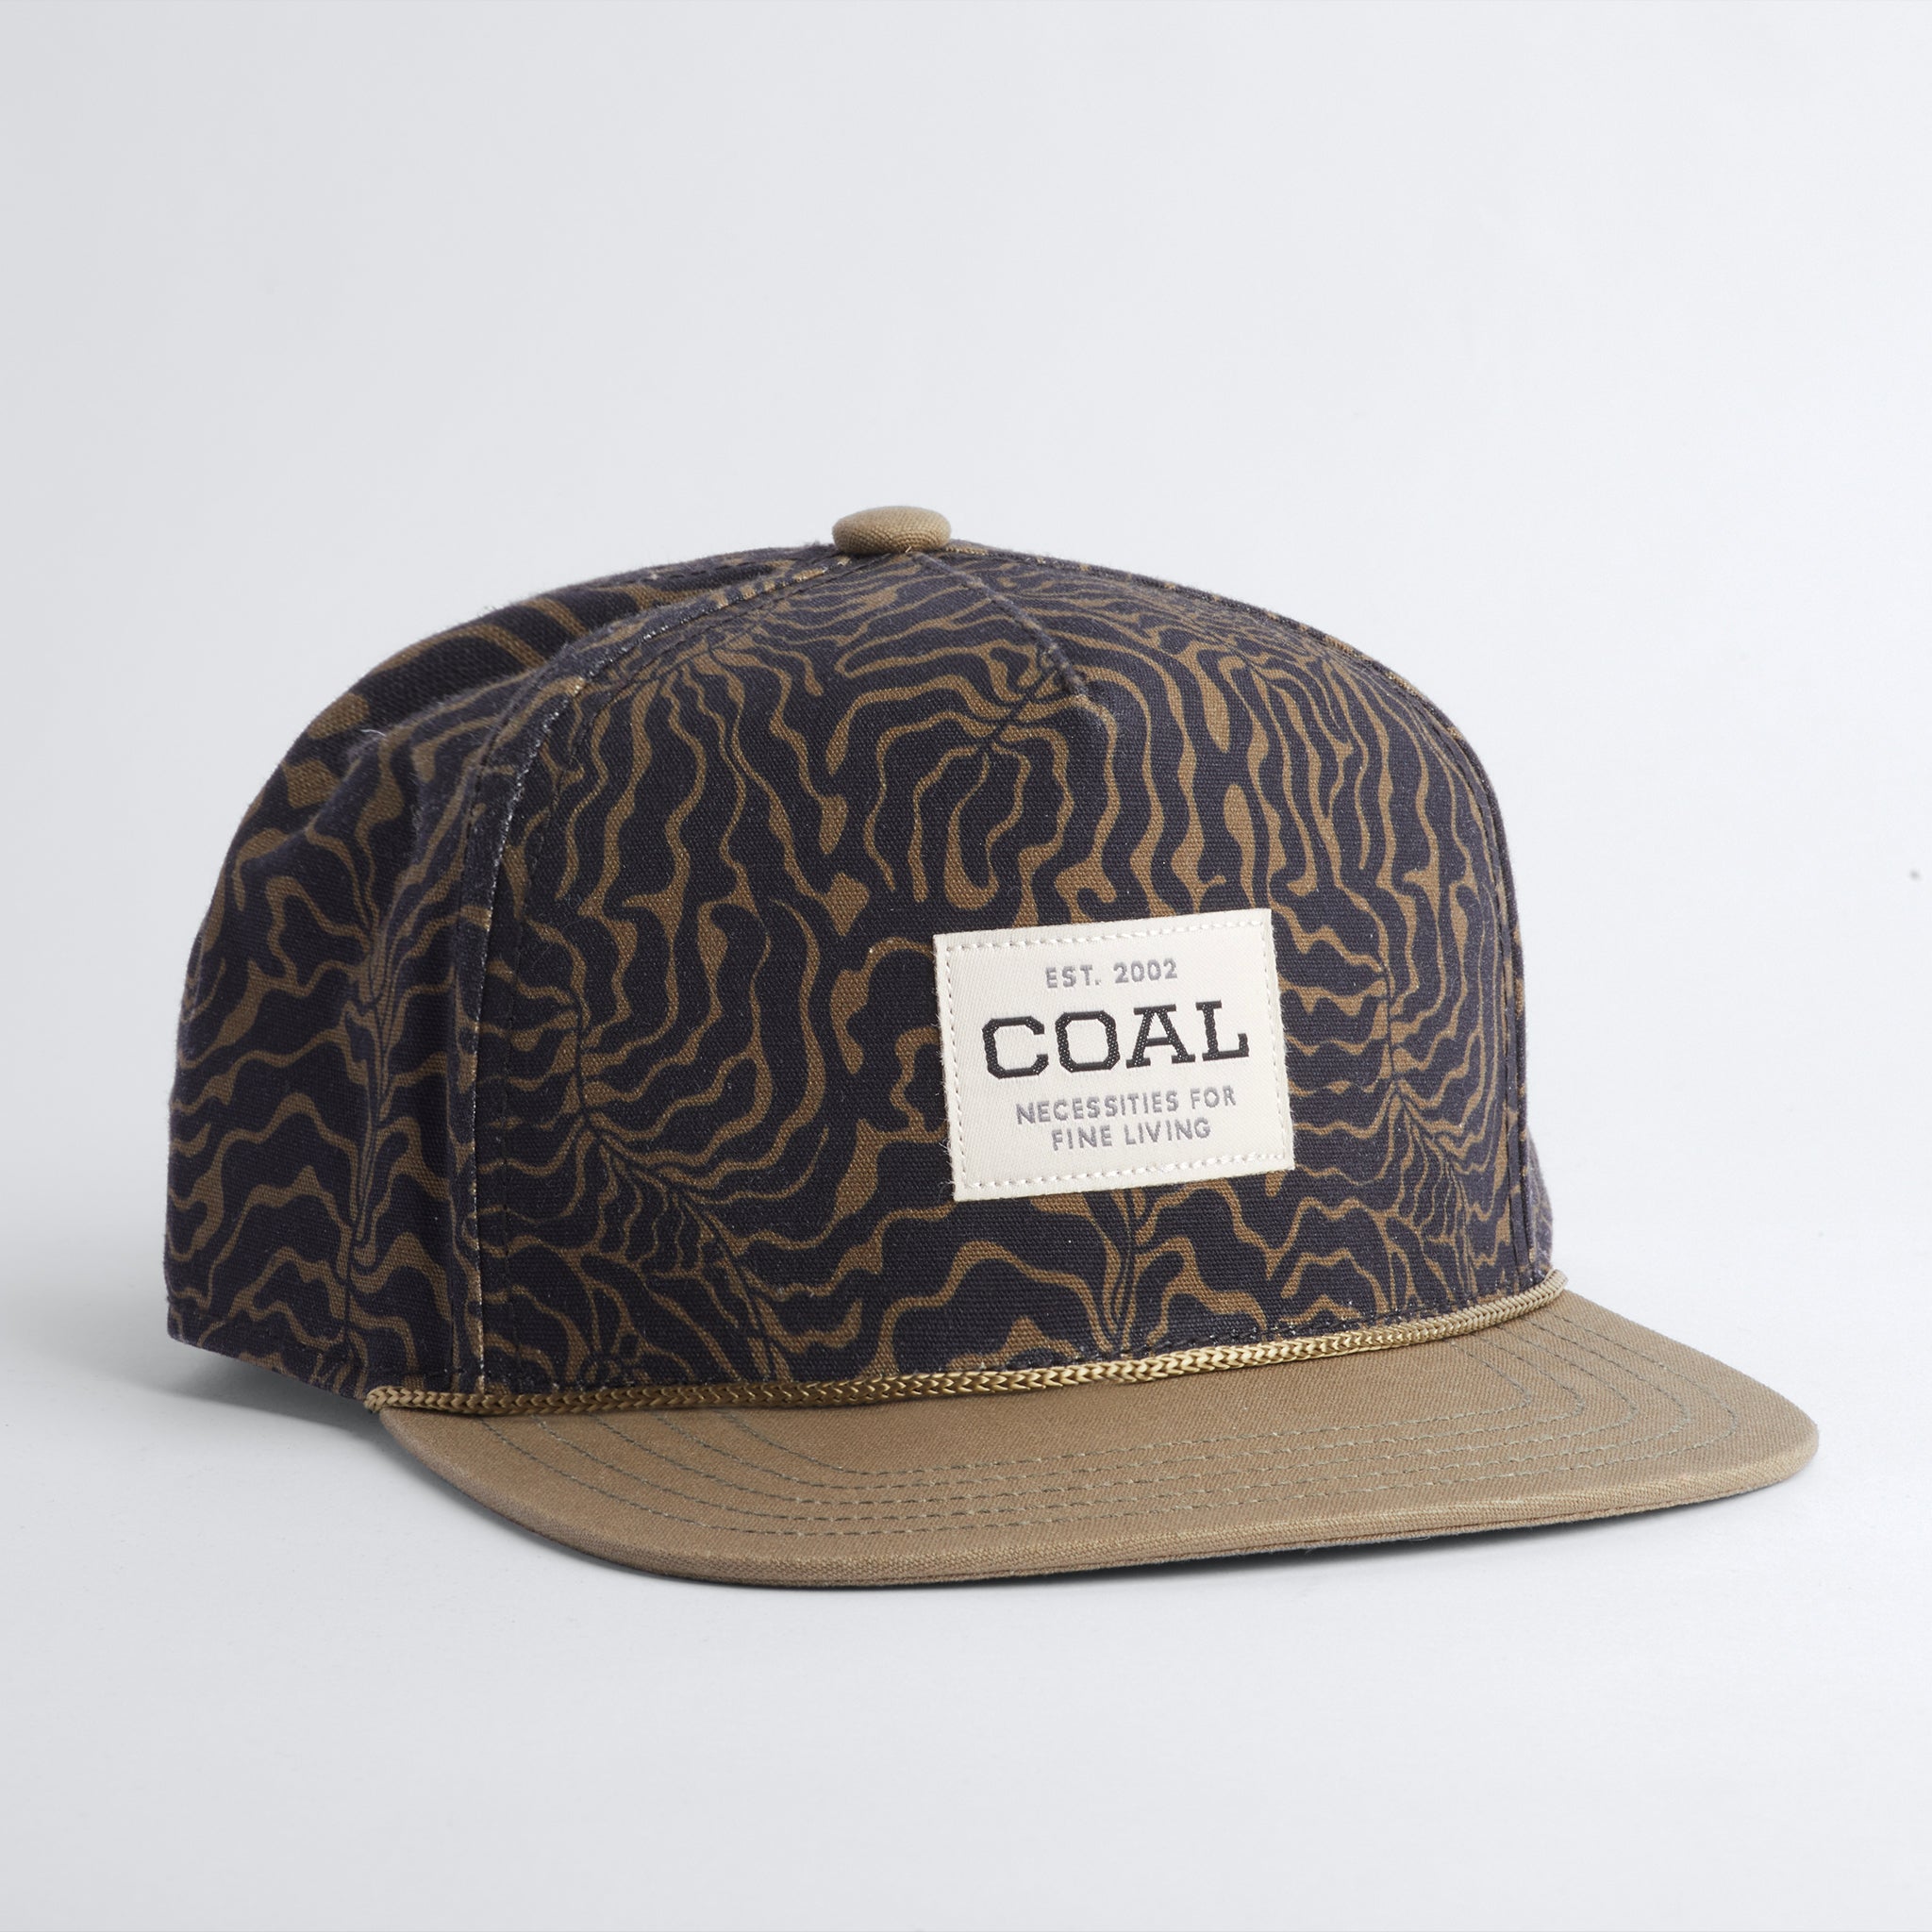 Coal Headwear  Quality Beanies, Hats, & Accessories For The Outdoors